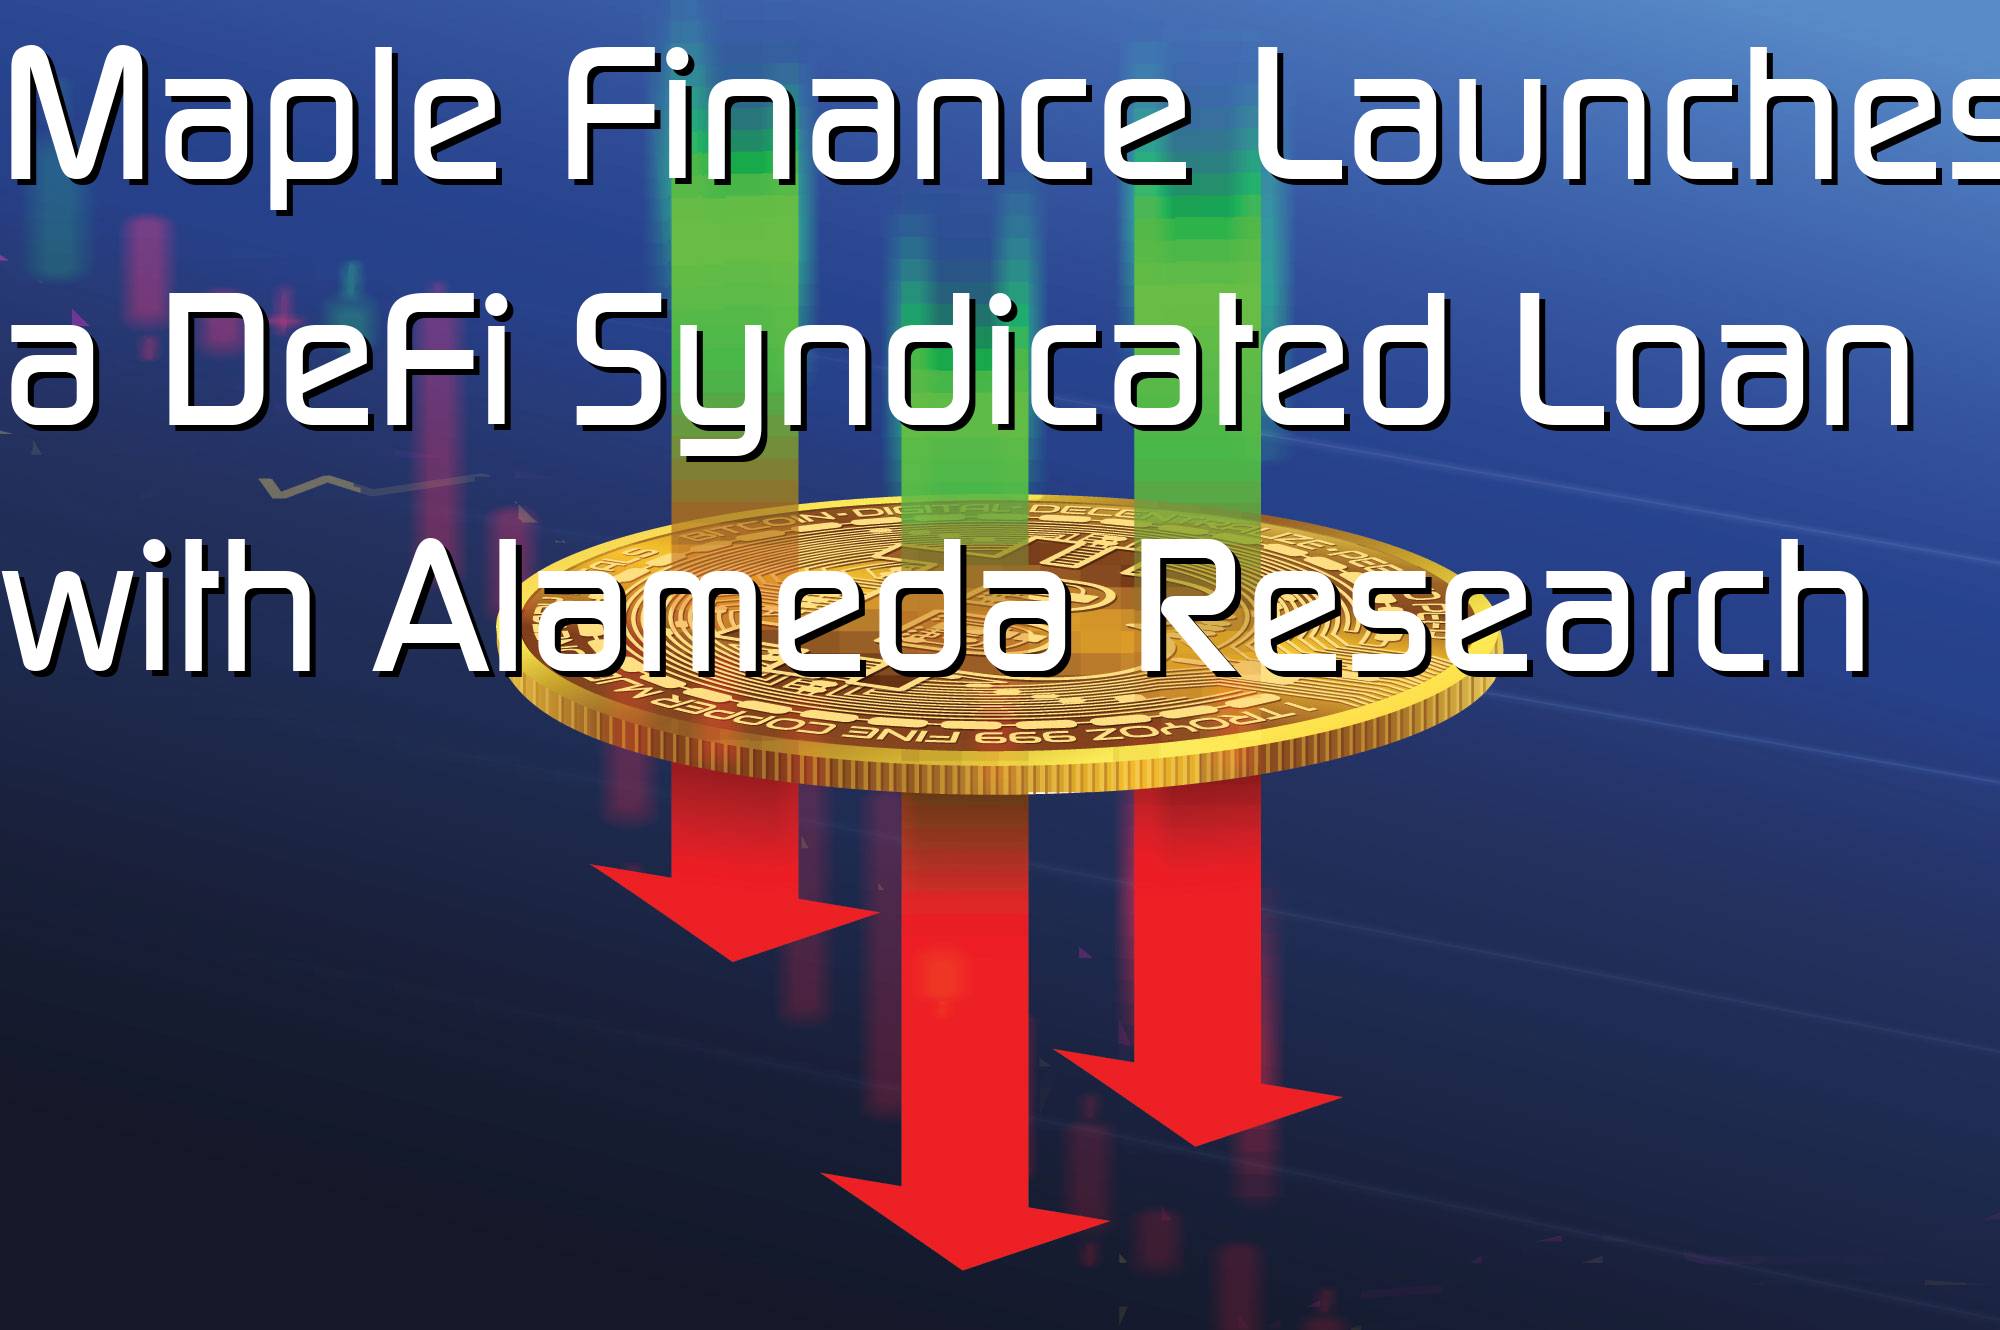 @$56780: Maple Finance Launches a DeFi Syndicated Loan with Alameda Research